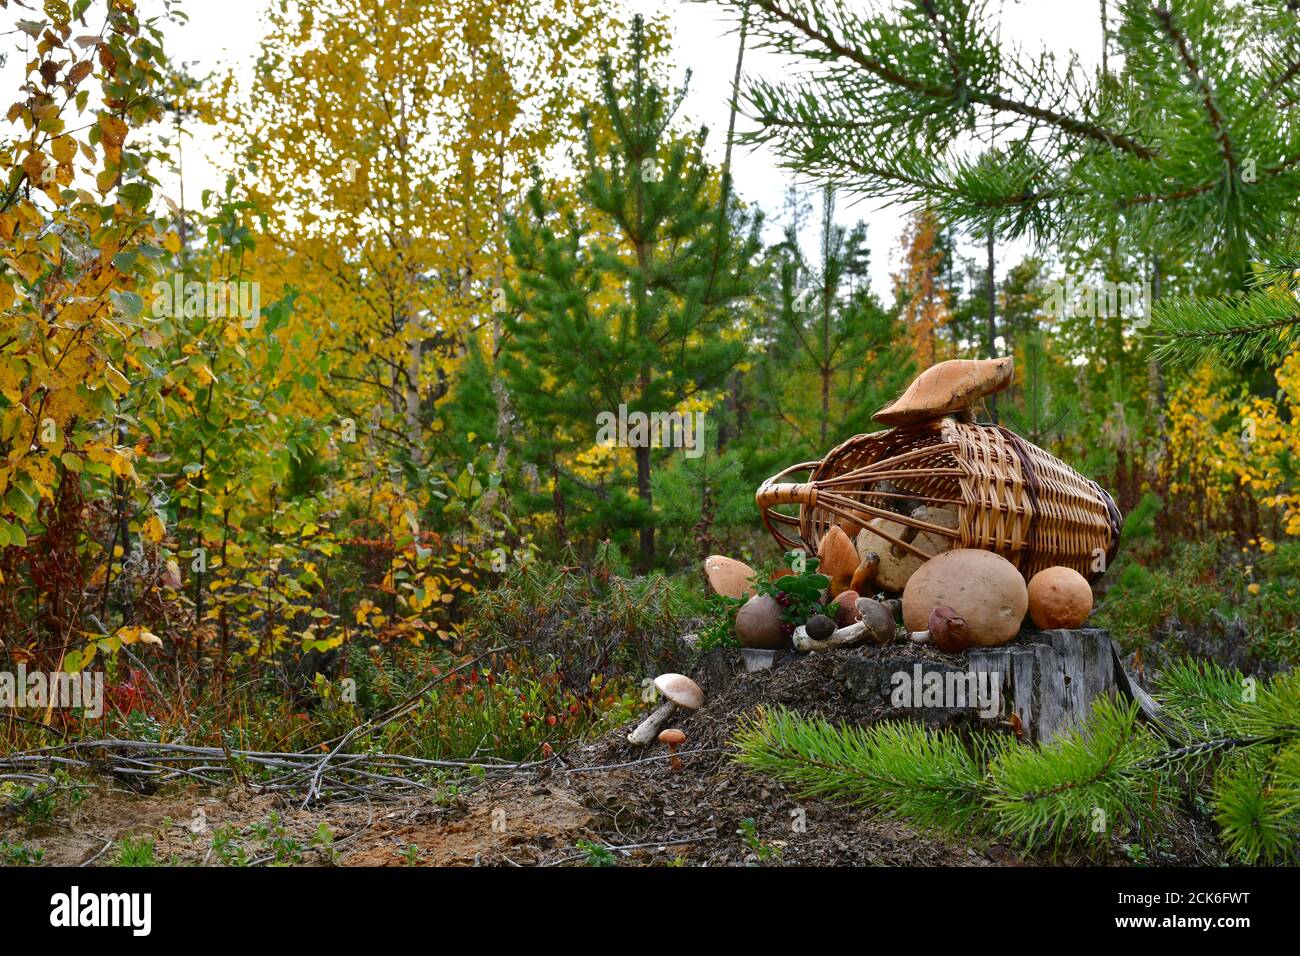 A basket of mushrooms and berries on a stump in the autumn forest. Stock Photo